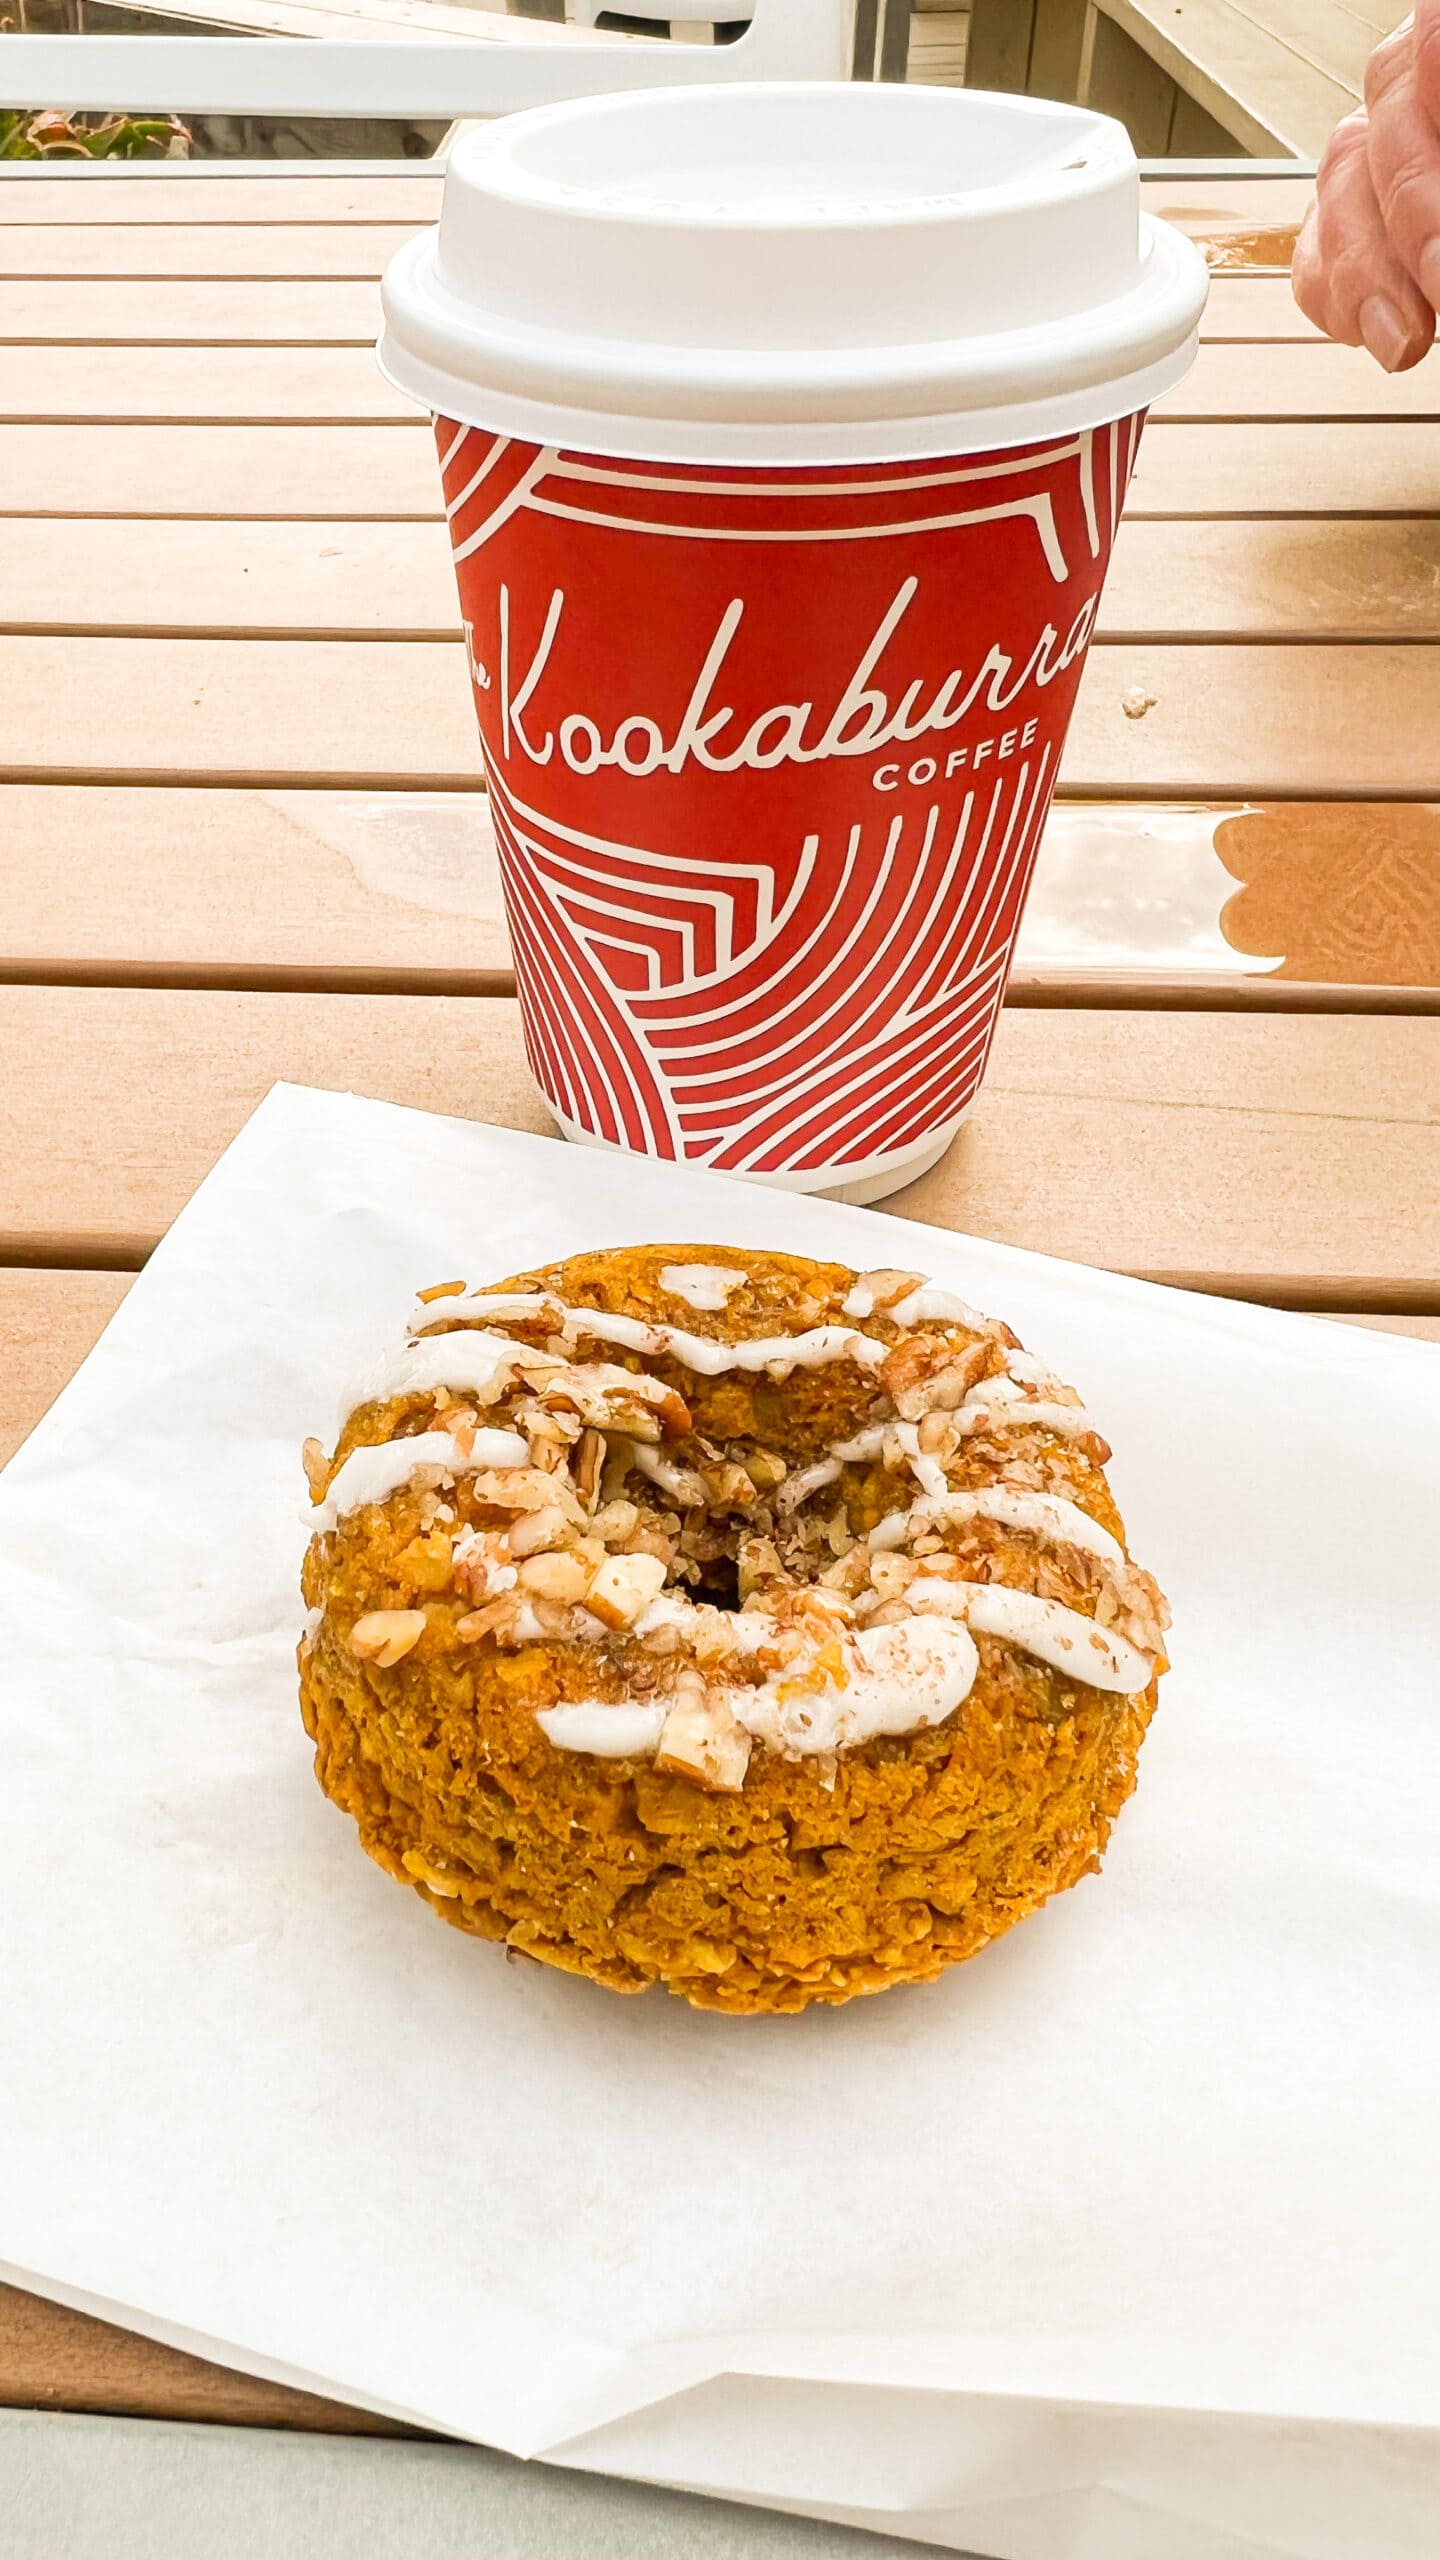 pumpkin donut next to a red cup of coffee from Kookaburra Coffee. 